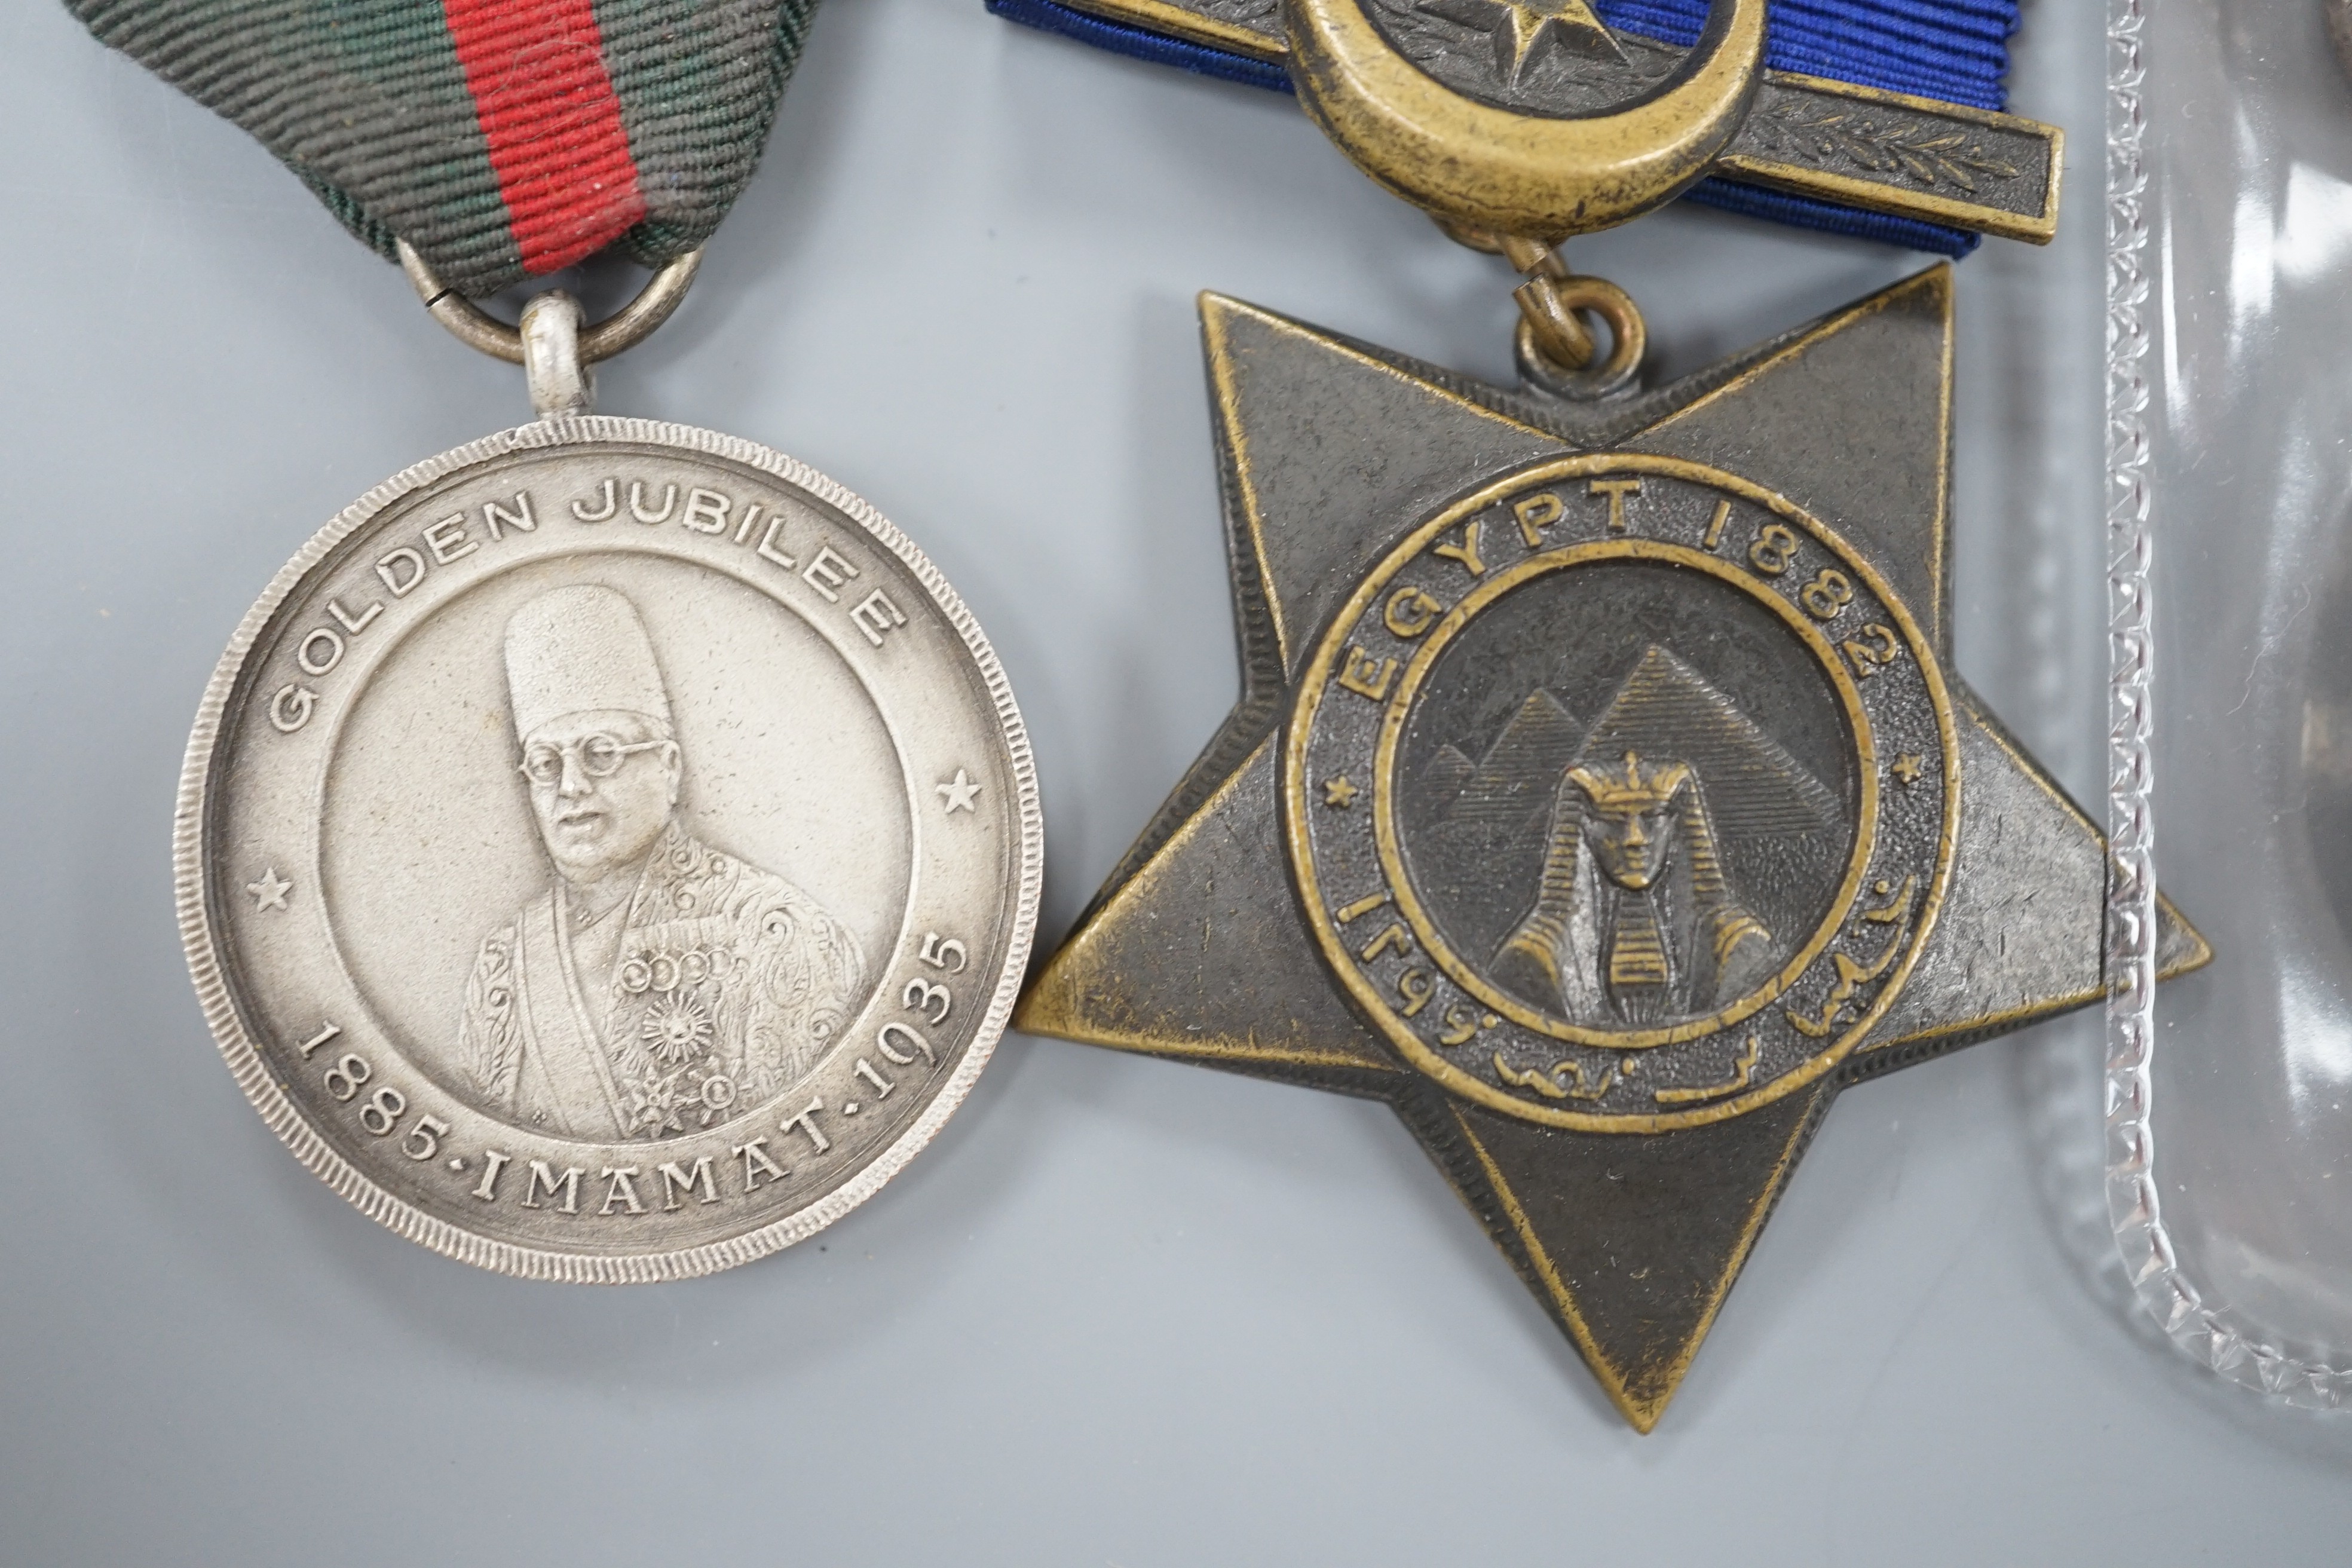 An India GSM with Burma 1885-7 clasp to 1167 Clr. Sergt. Doidge (or Dadge) 2d. Bn. L’pool R. together with a Turkish medal for the Crimean war and a Khedive’s bronze star (1882)